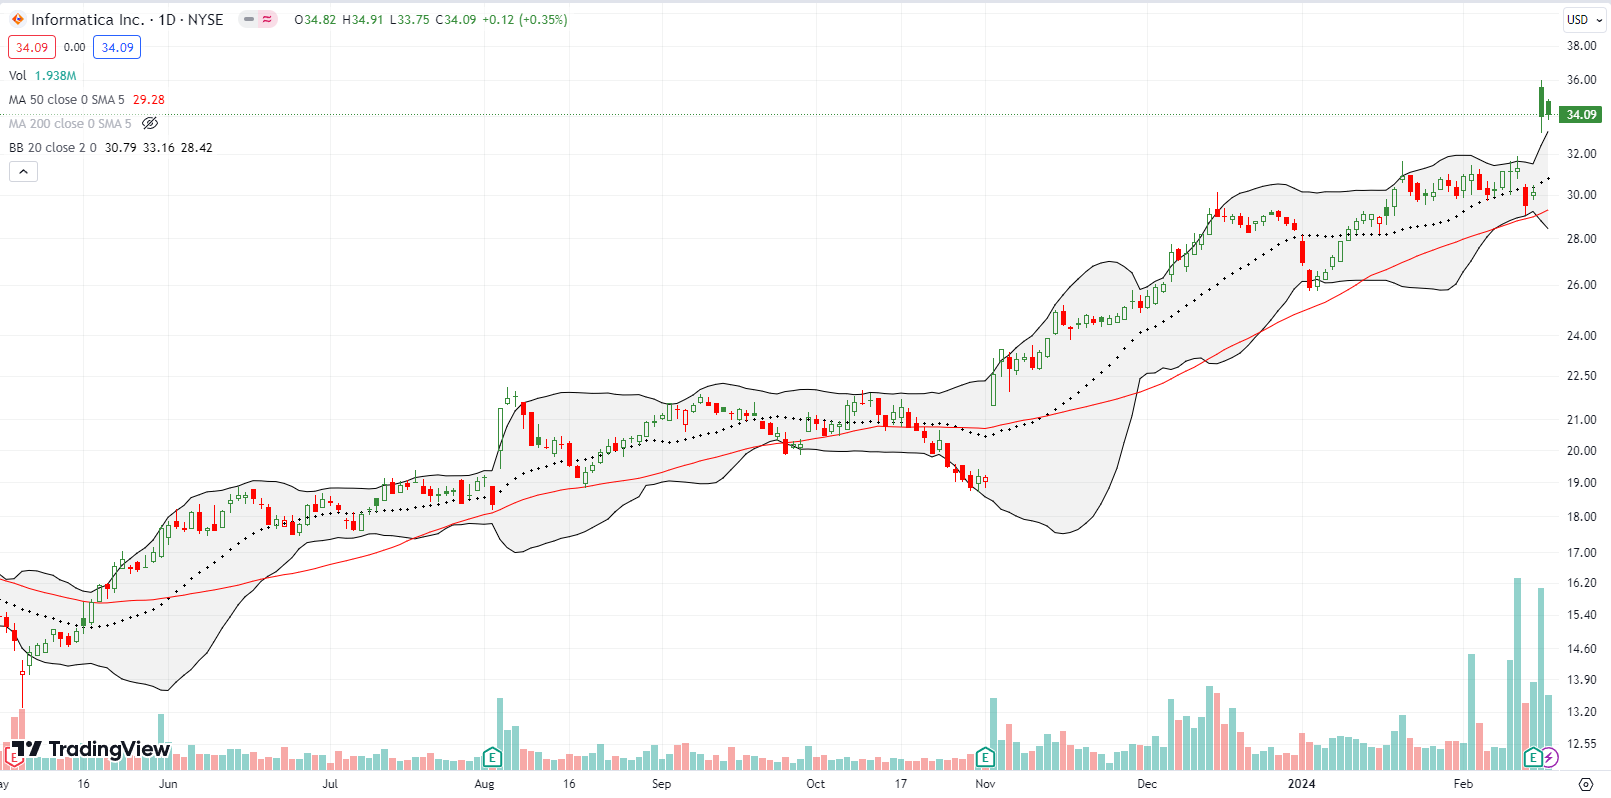 After a 12% post-earnings increase, Informatica Inc (INFA) is now gaining on its all time high.